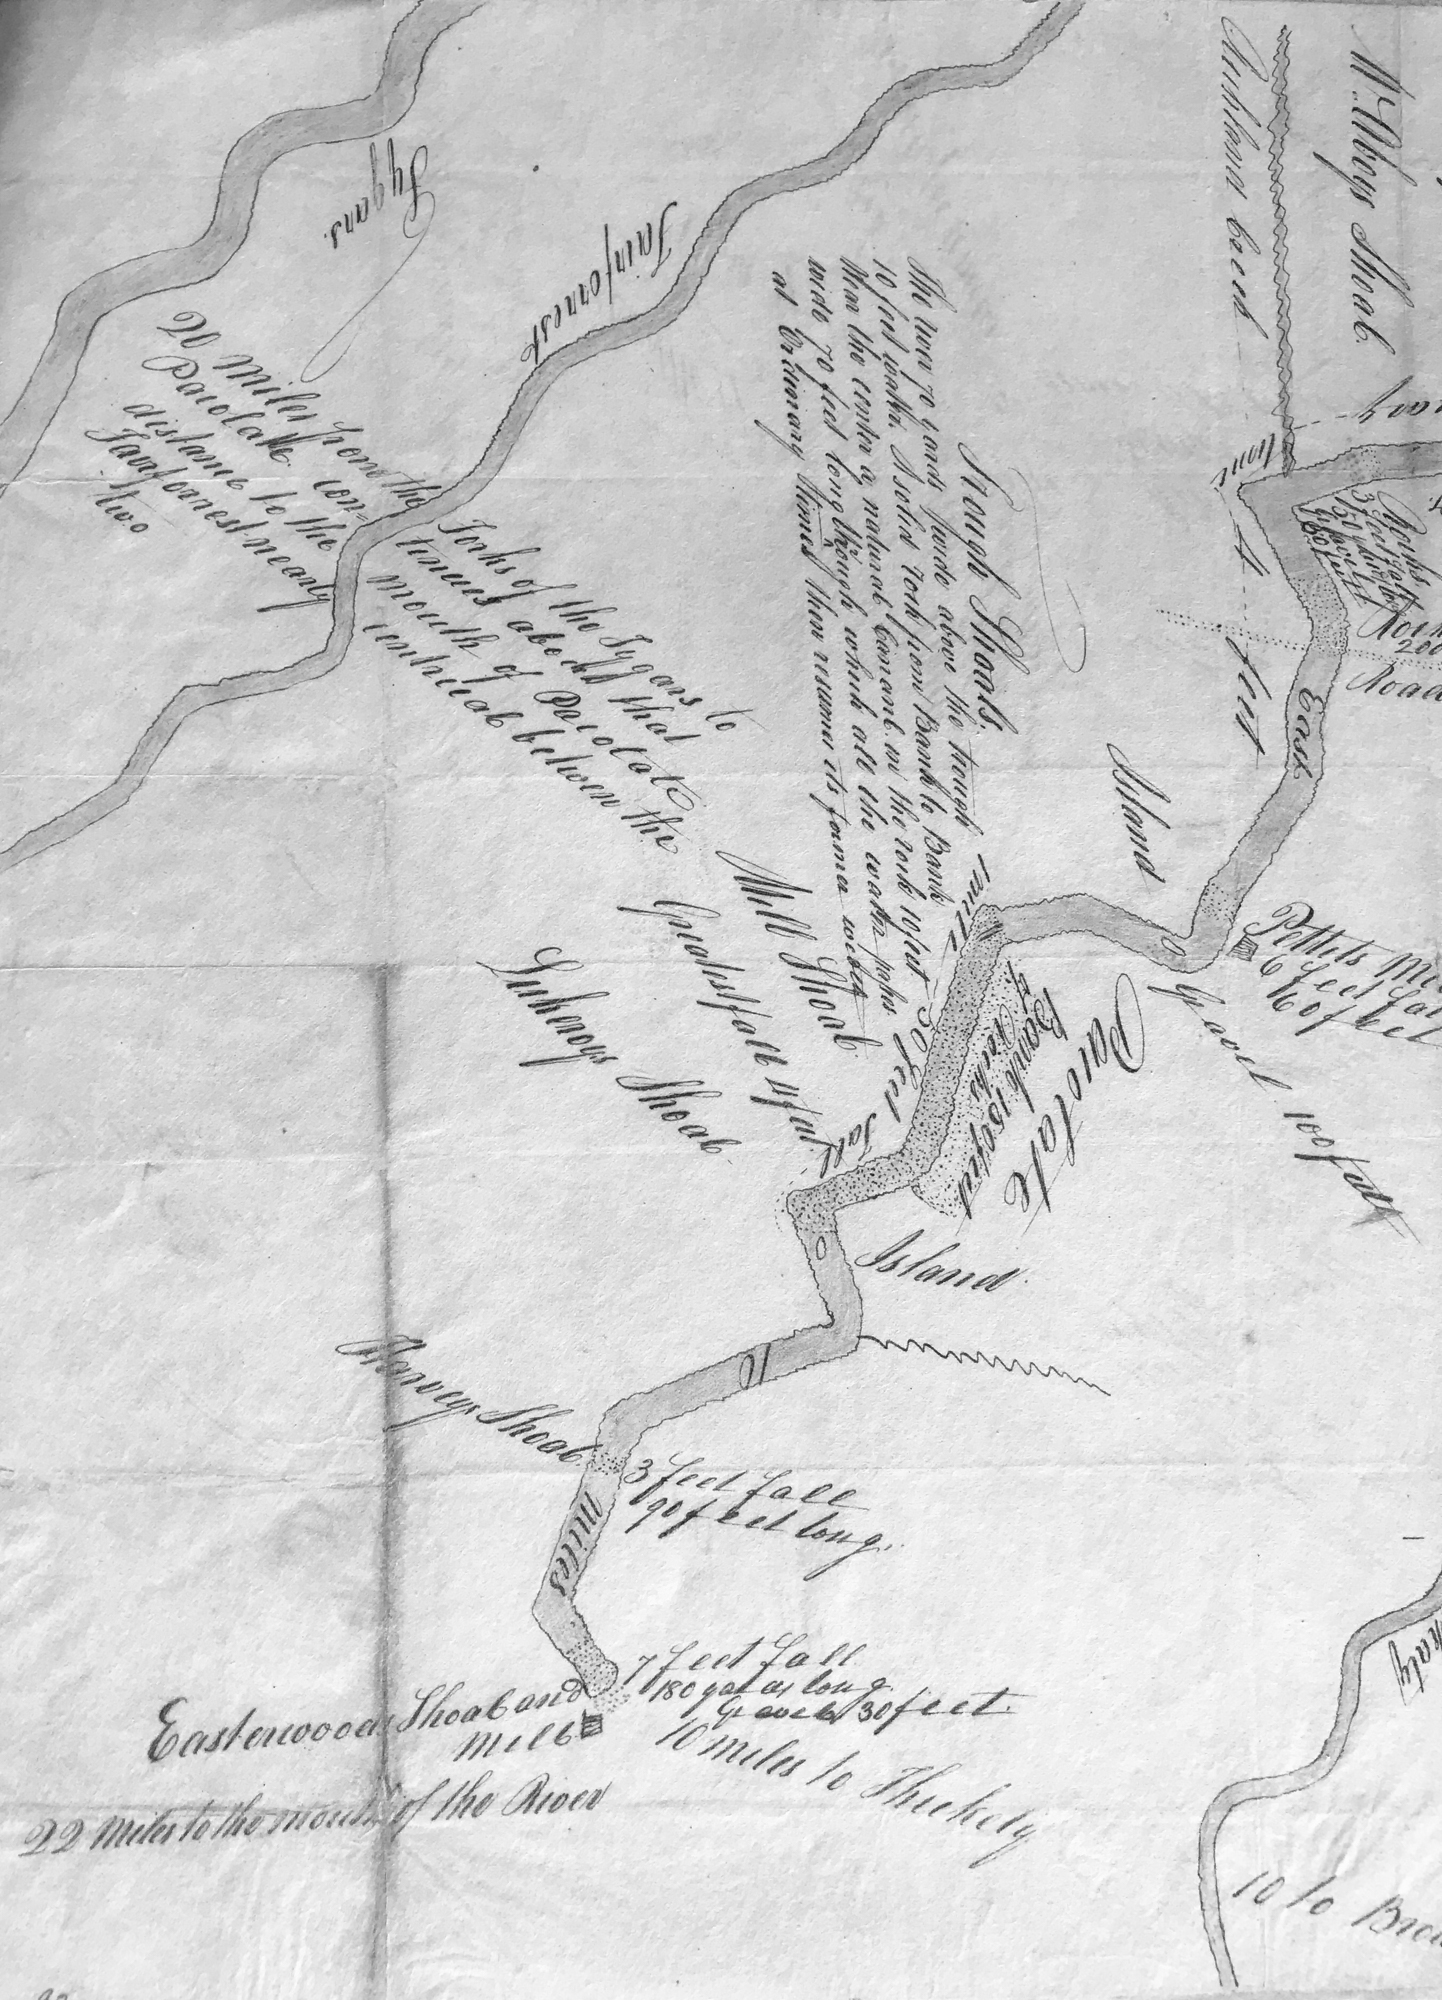 EARLY MAP OF TROUGH AND PACOLET AREA - SCDAH CANAL FILES